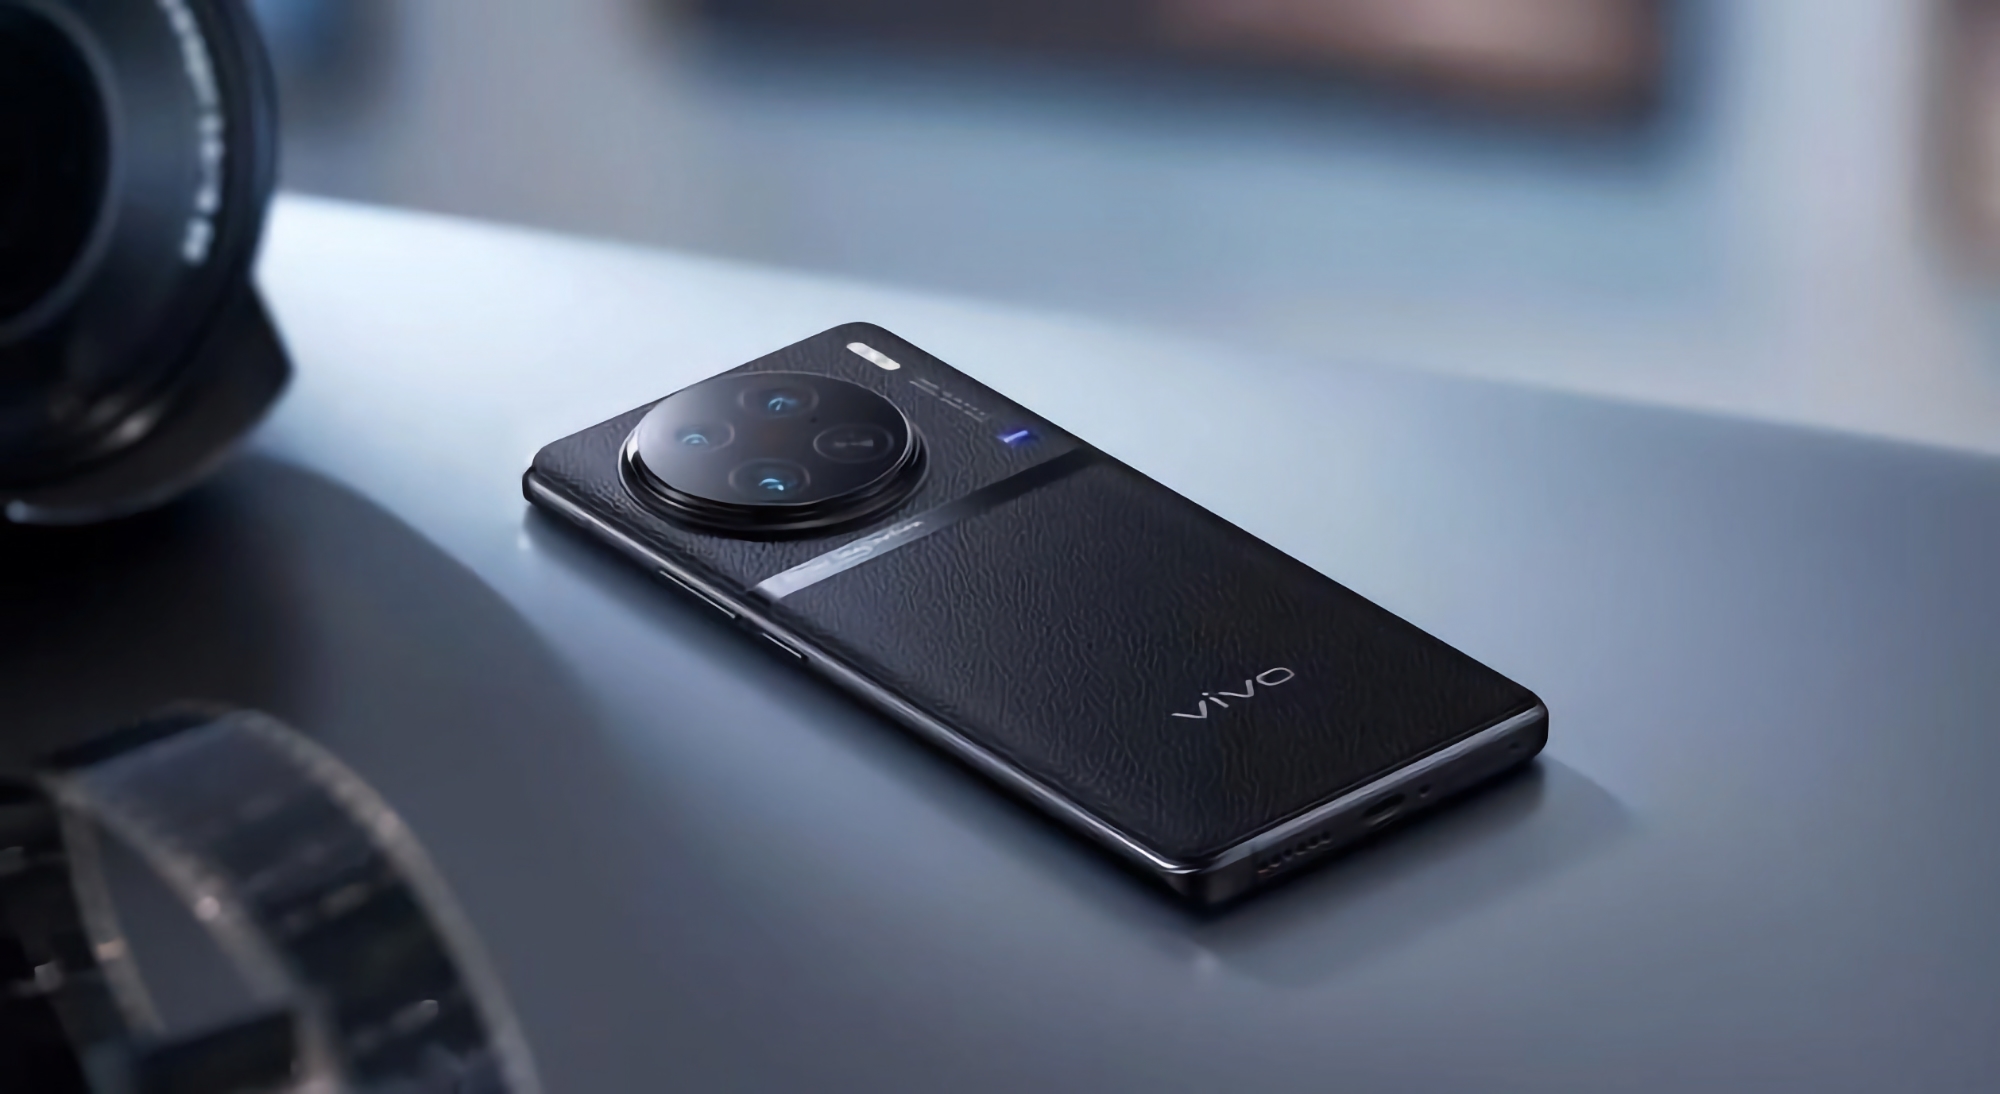 Vivo X100 (Pro) camera flagship series breaks sales record of 1 billion,  X100s model rumored to be on the horizon -  News